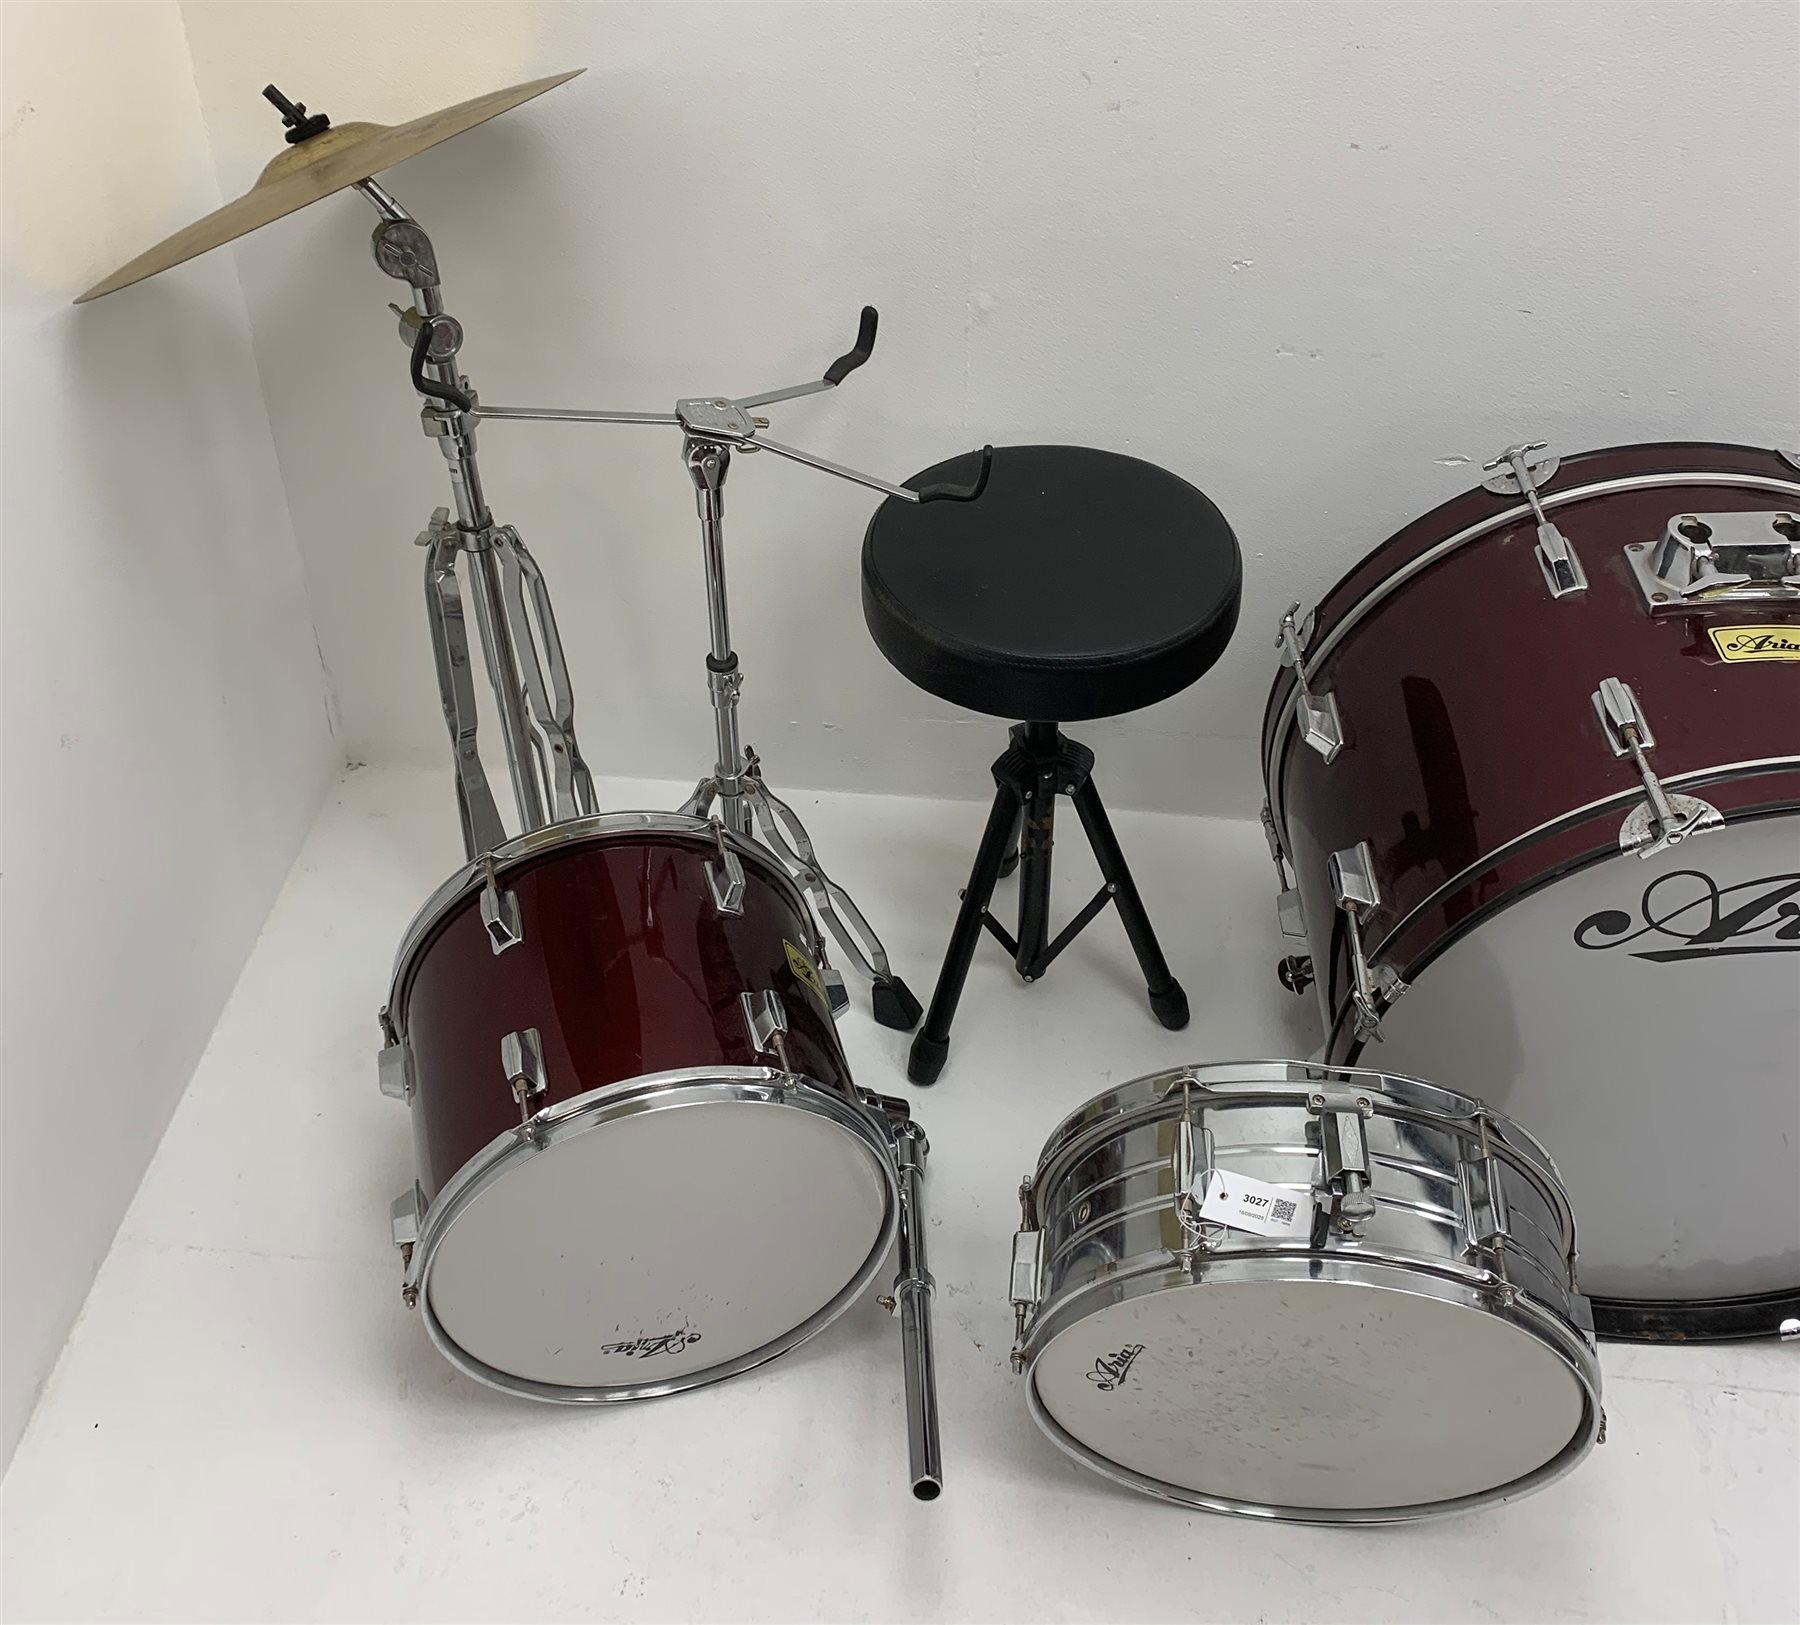 RTV 09/10/20 Aria five-piece drum kit with Hi-hat, crash and ride cymbals, stool, pedals, sticks etc - Image 2 of 4